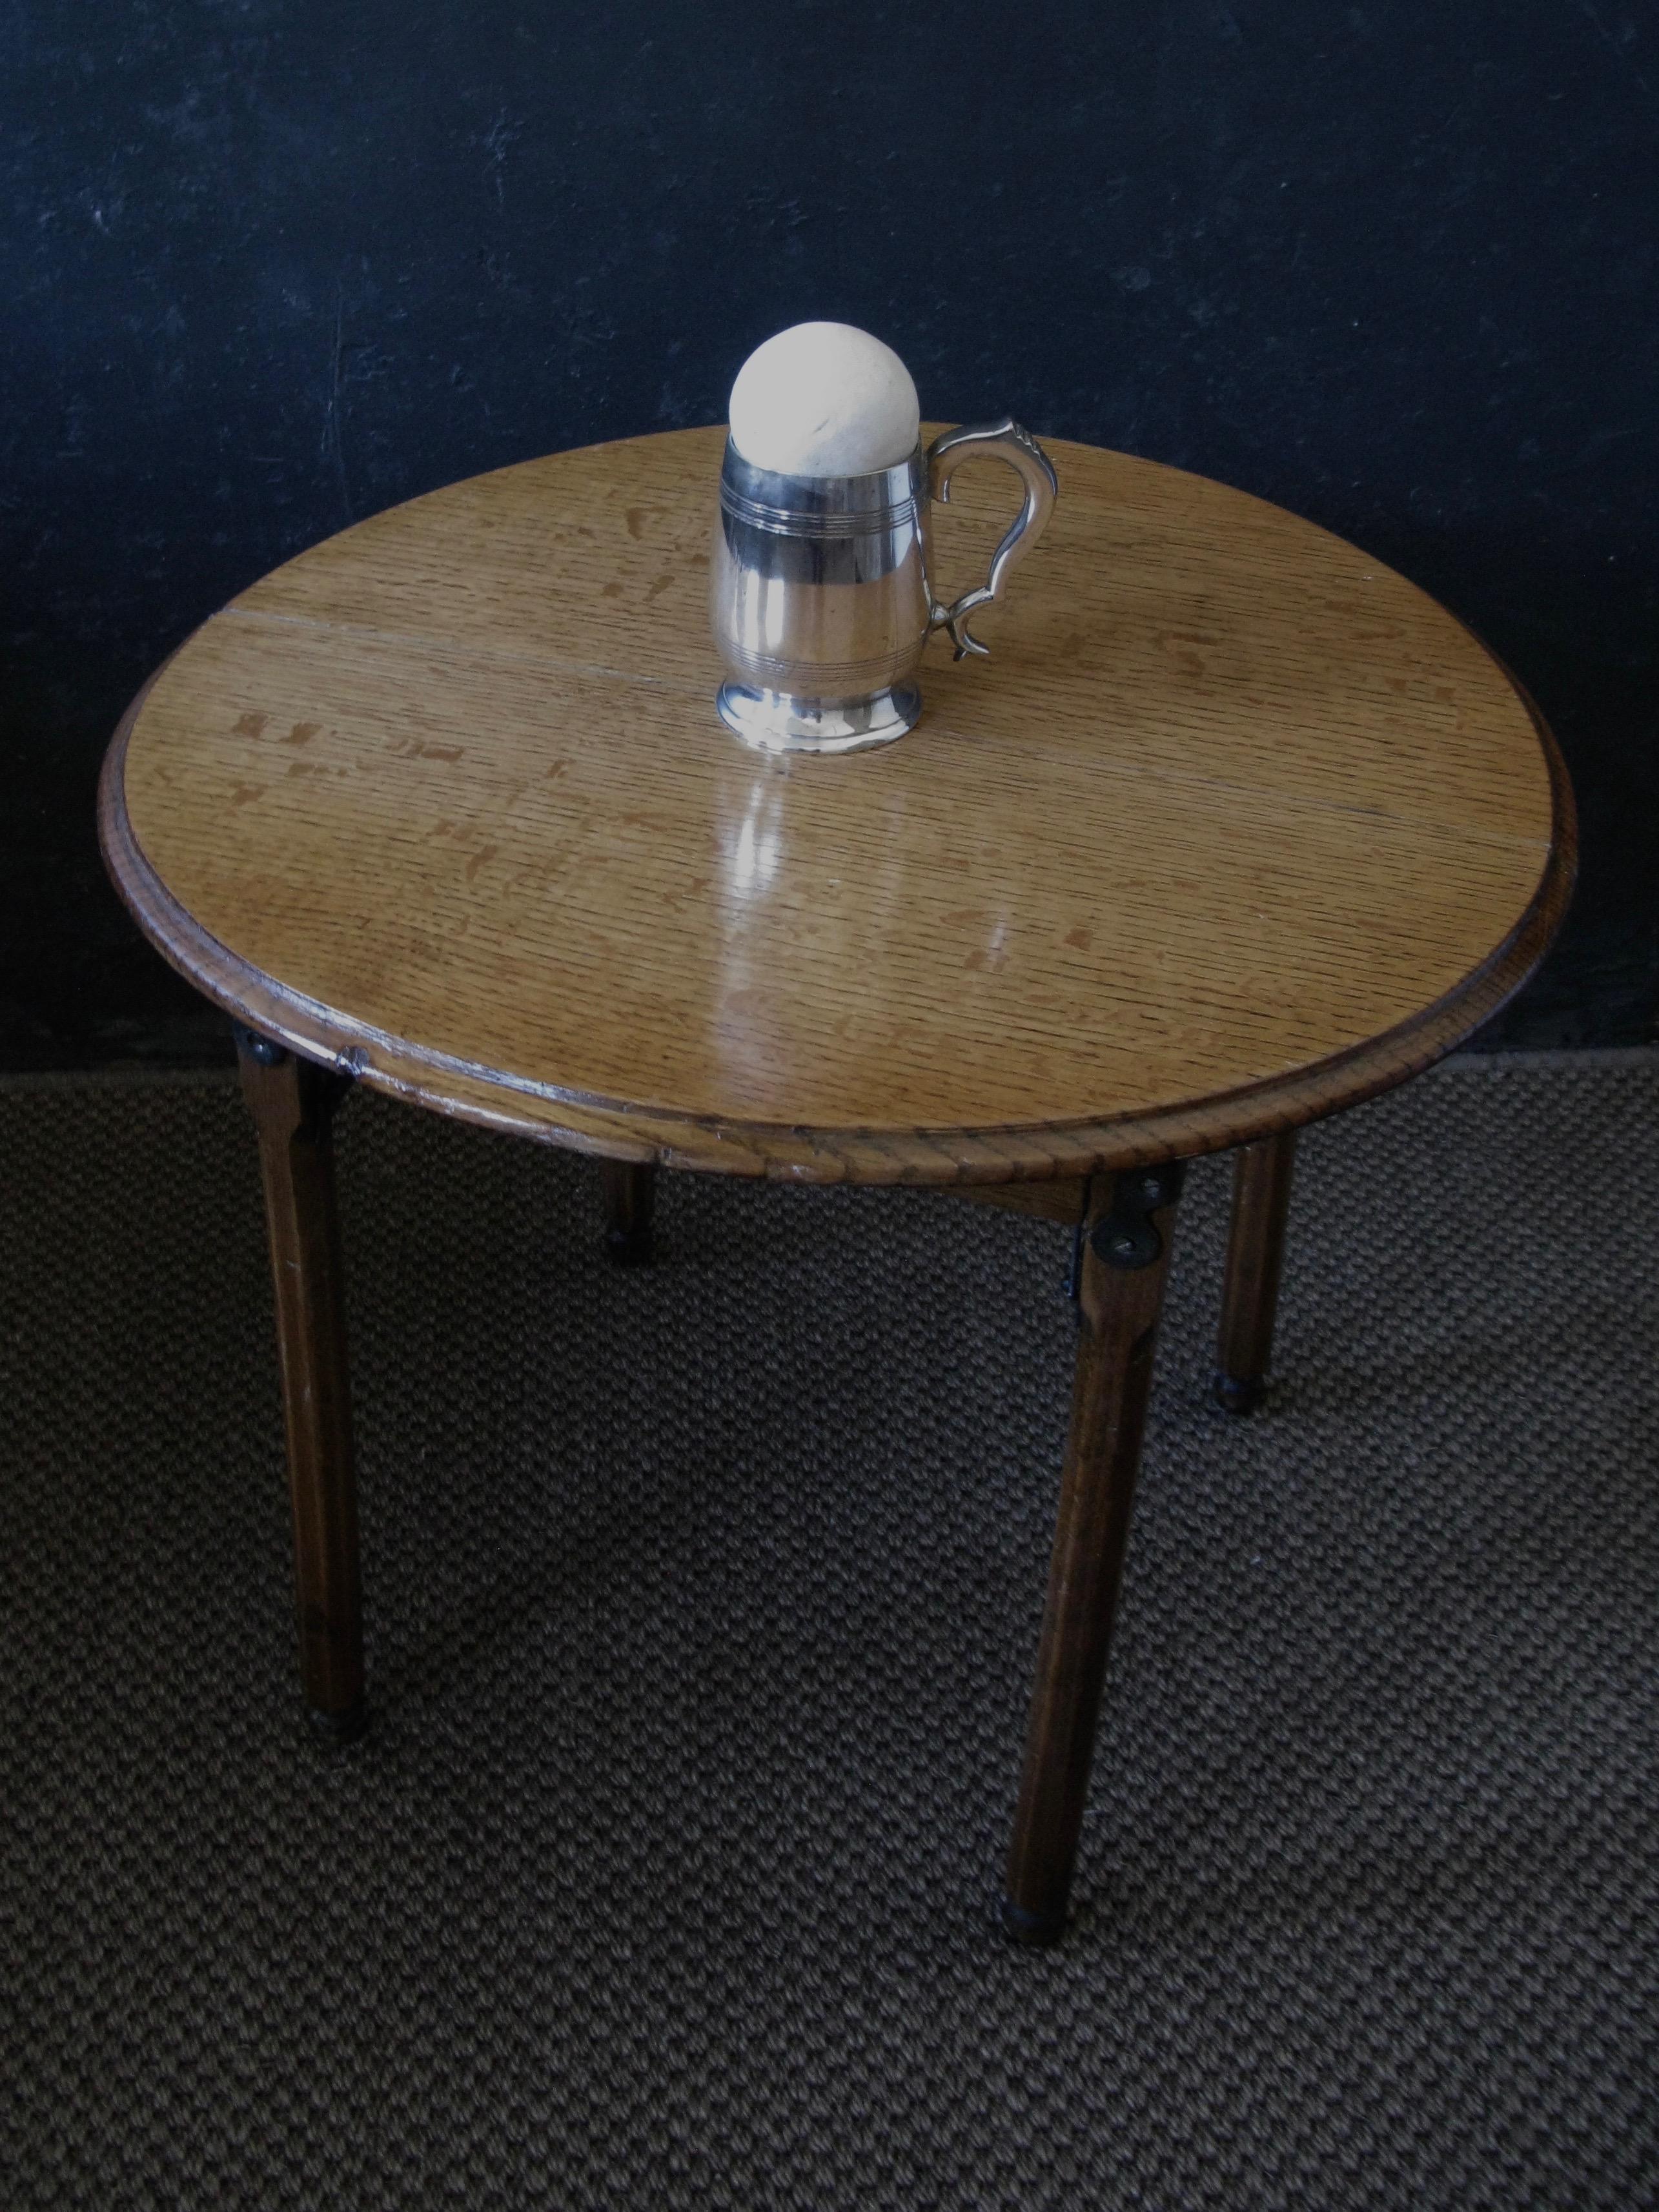 Lovely small occasional oak table, England, Arts & Crafts Period
A very original table standing on 4 small ball feet, with a flip harmonica flip iron system.
A bold Arts and crafts statement this small table made
Sympathetically polished to bring